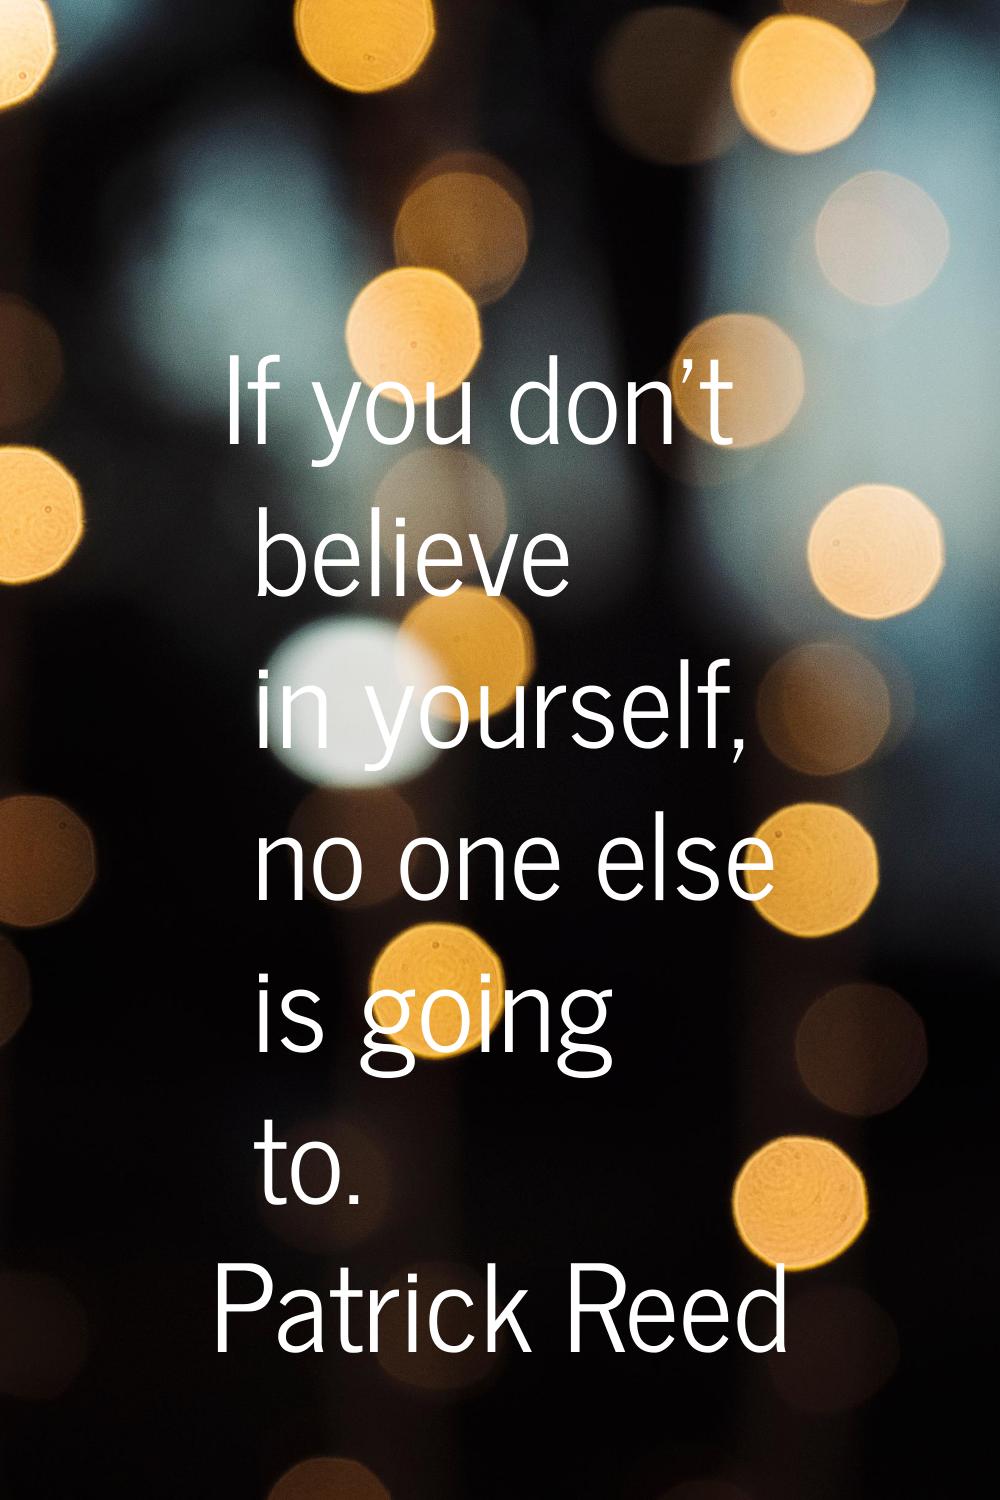 If you don’t believe in yourself, no one else is going to.